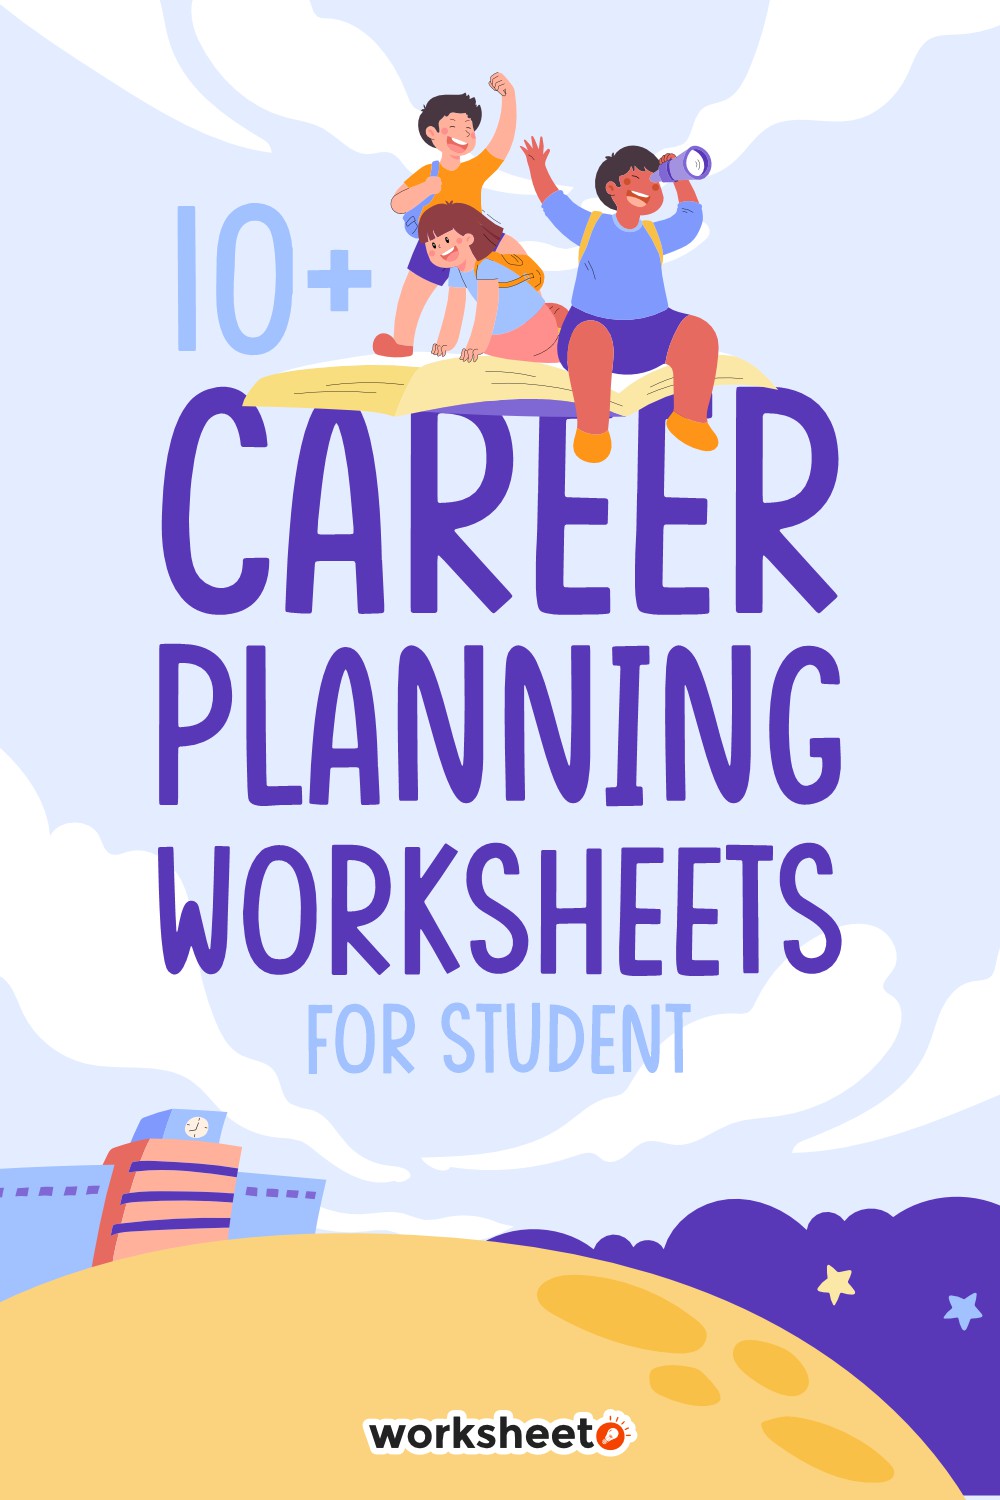 8 Images of Career Planning Worksheets For Students